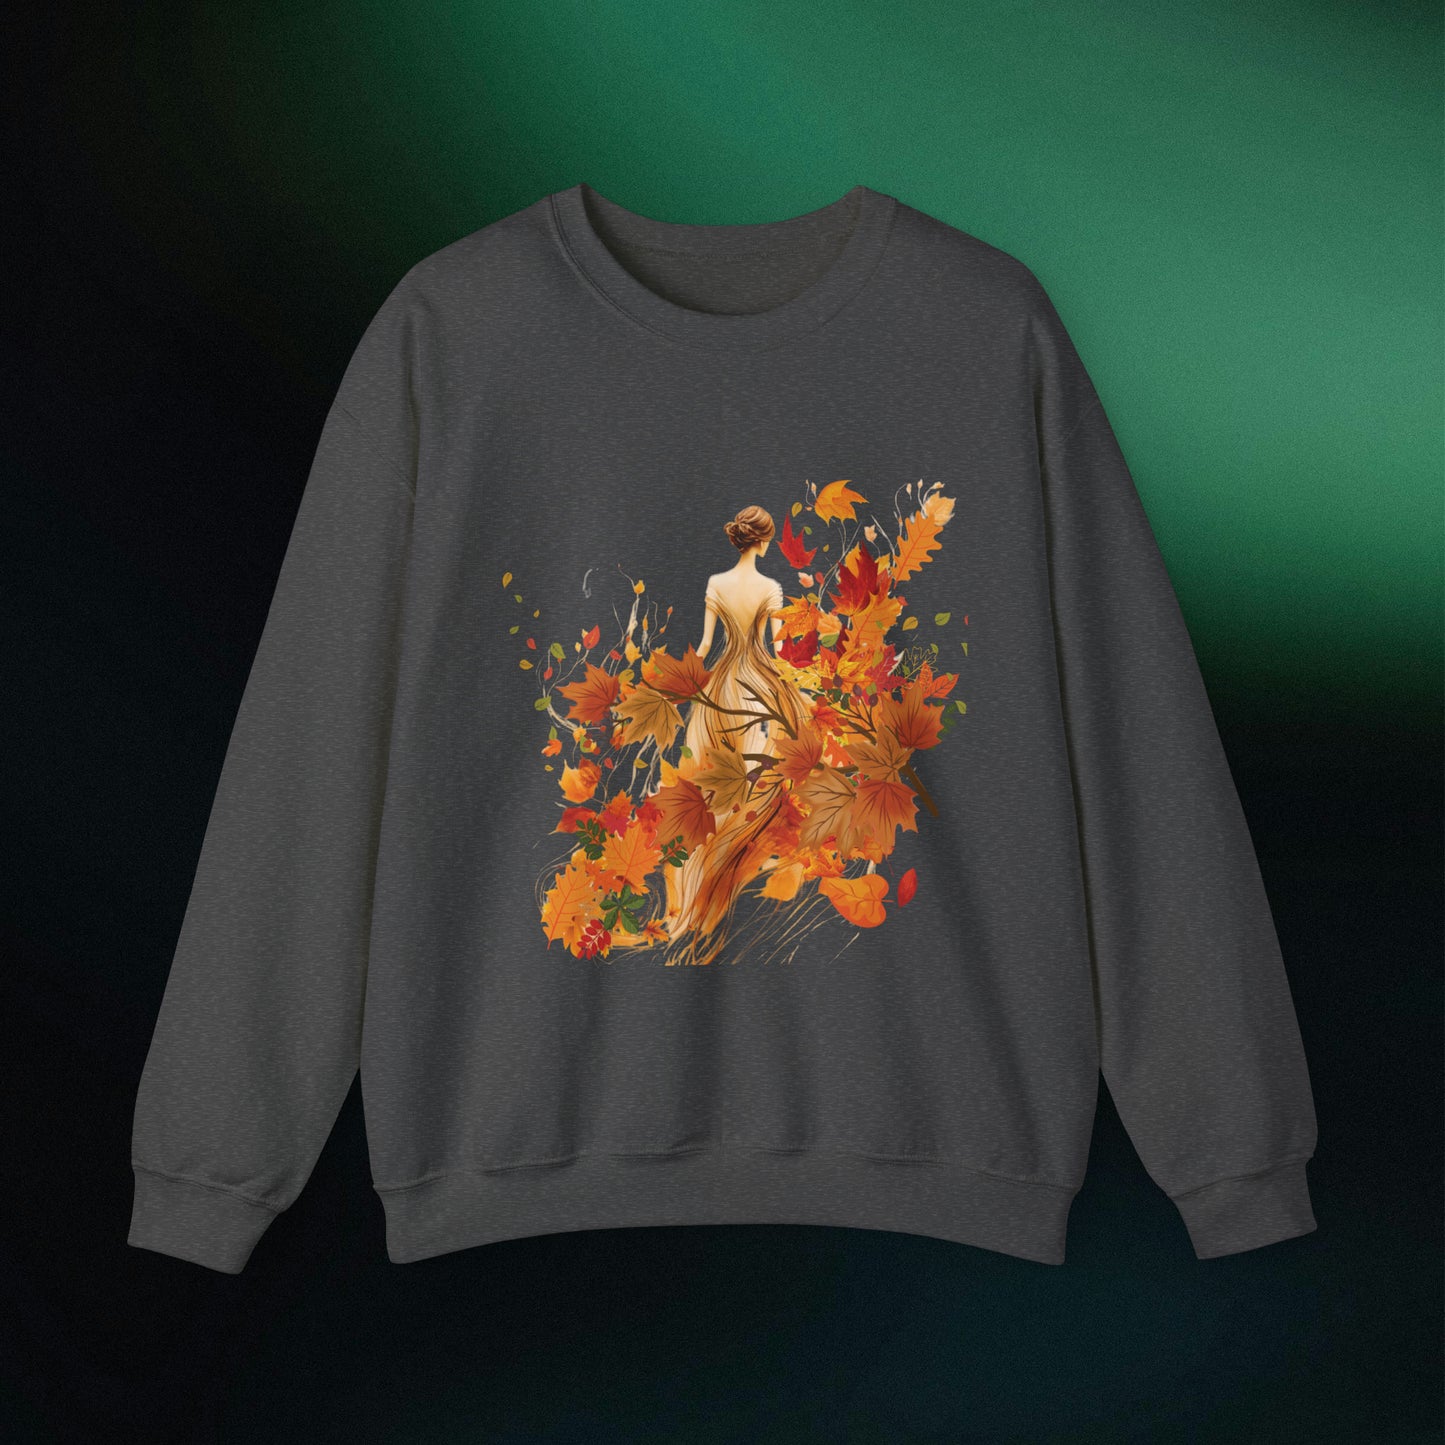 Whimsical Dreams in Autumn Hues: Romantic Dreamy Female Surrounded by Autumn Leaves Sweatshirt Sweatshirt S Dark Heather 